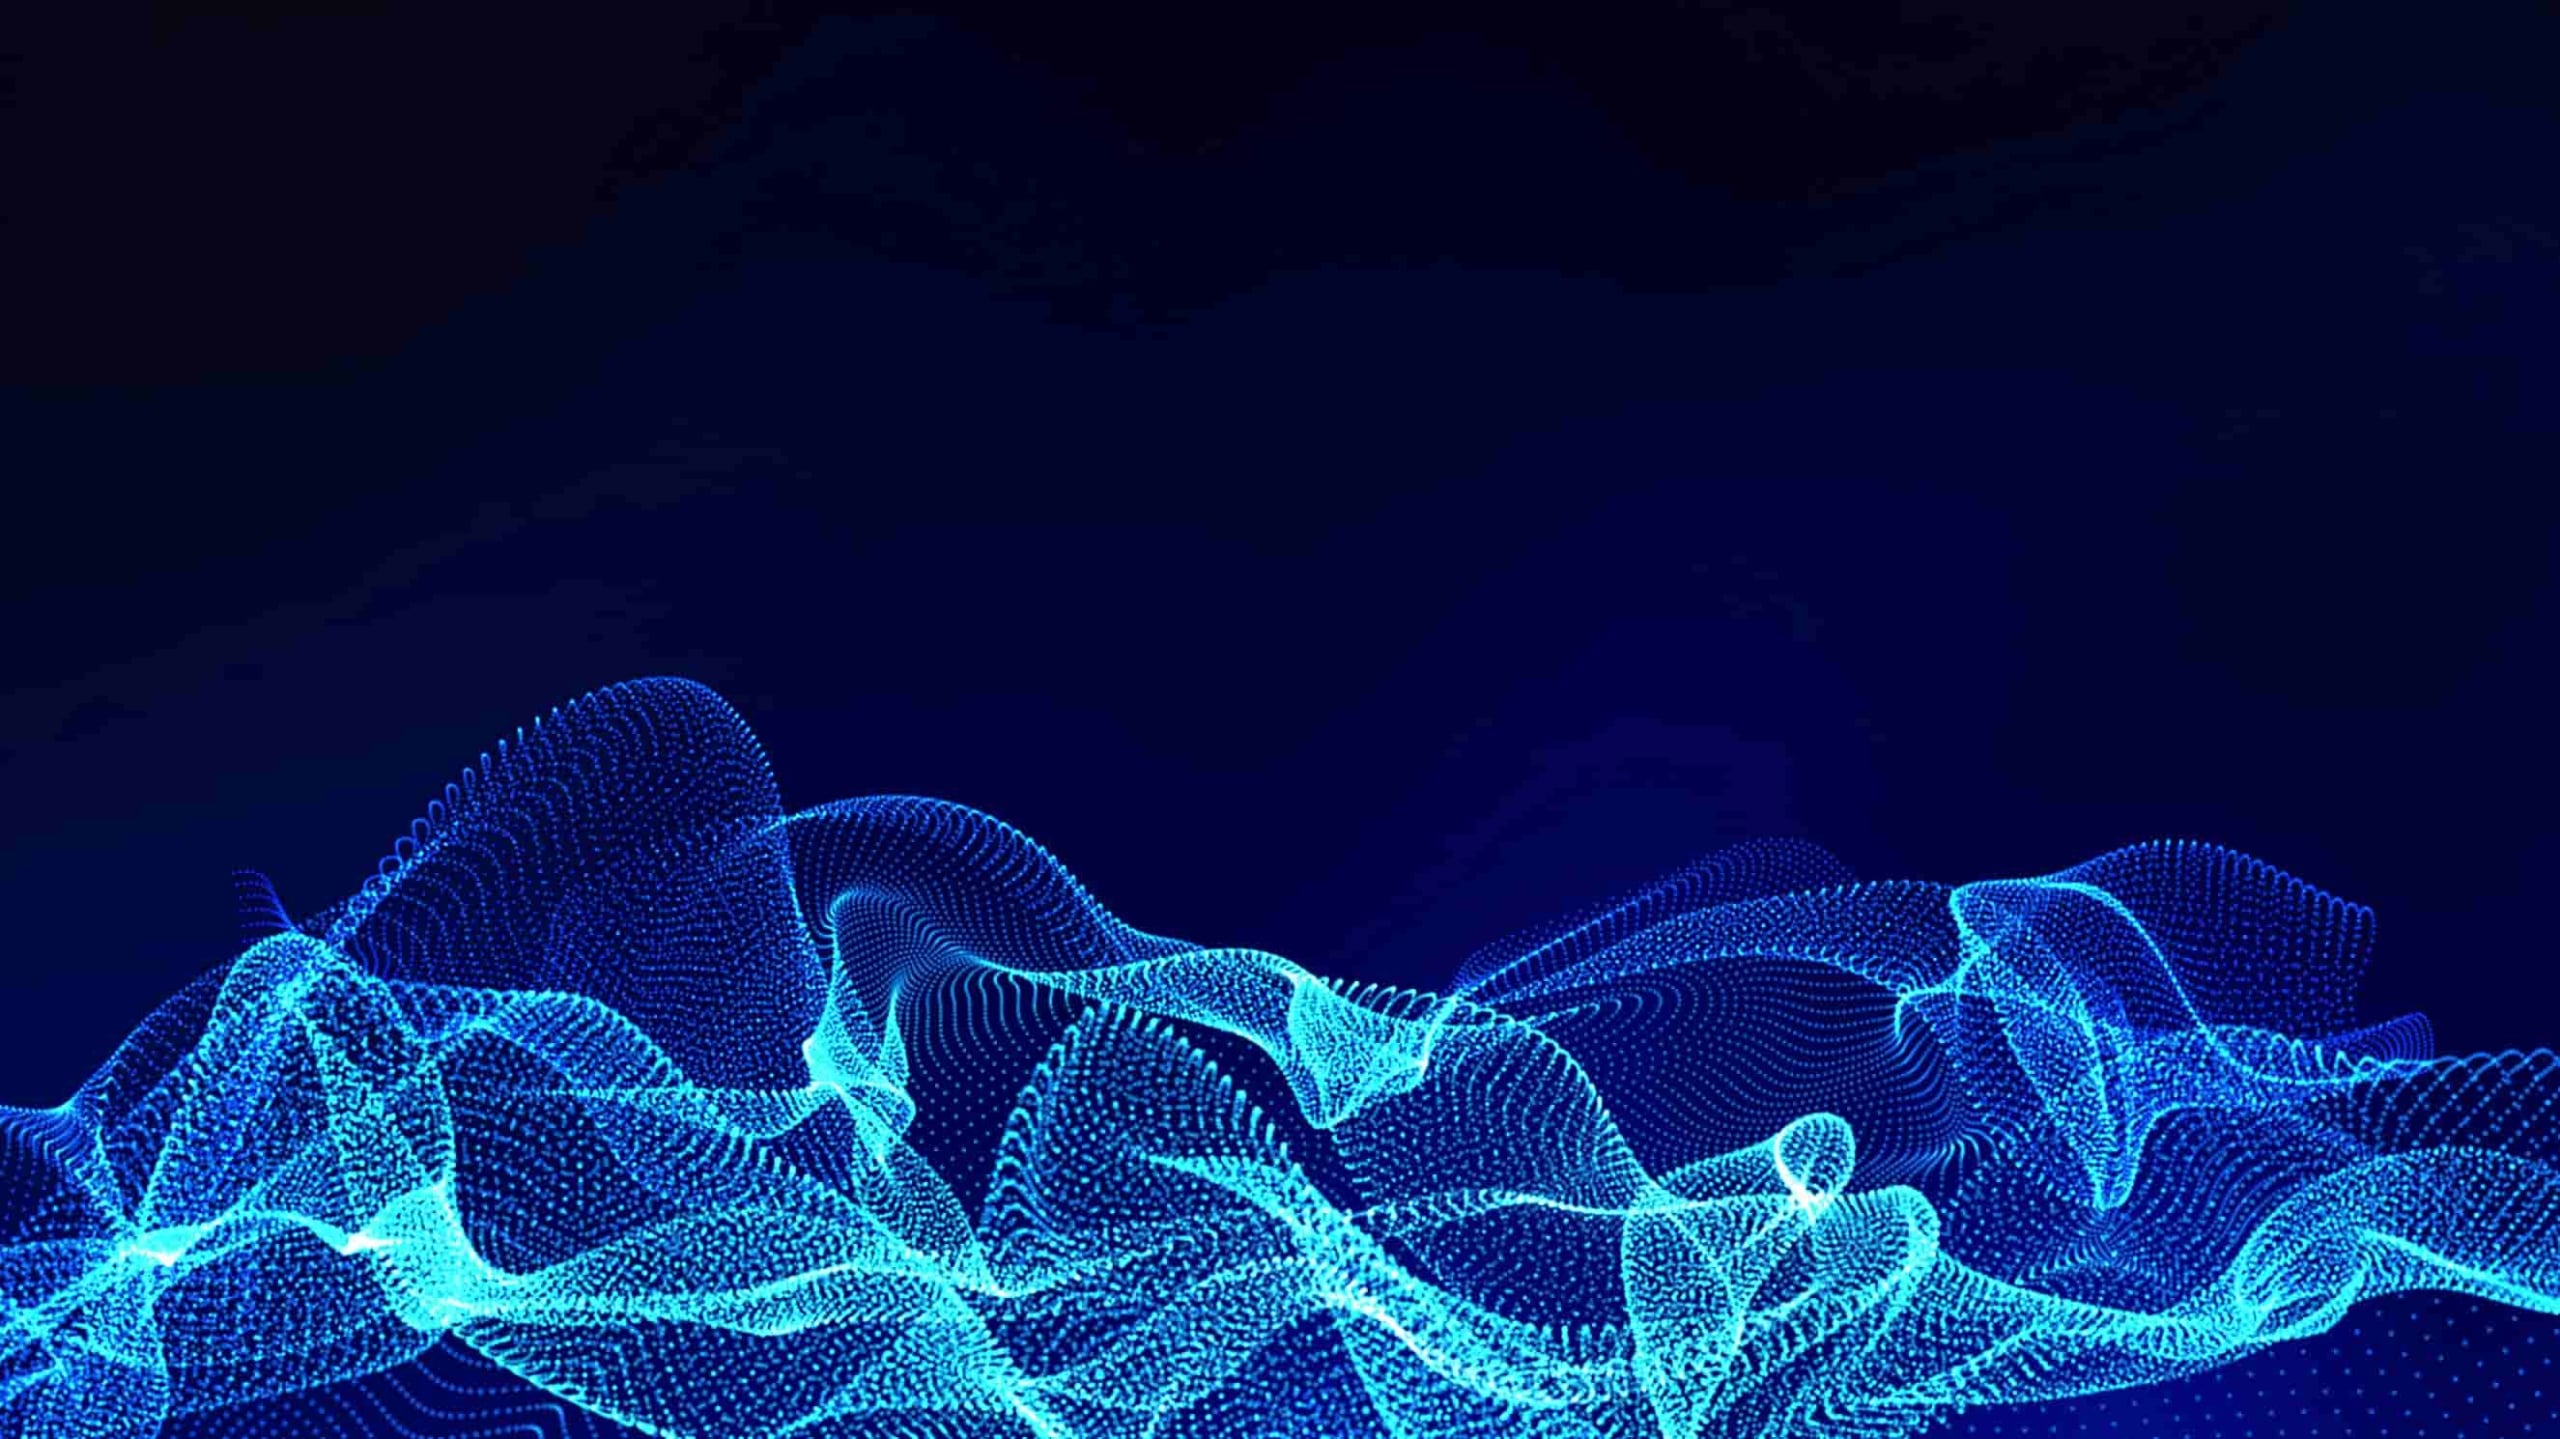 A dynamic abstract image of flowing blue particle waves on a dark blue background, representing data flow or network connectivity in a digital space.